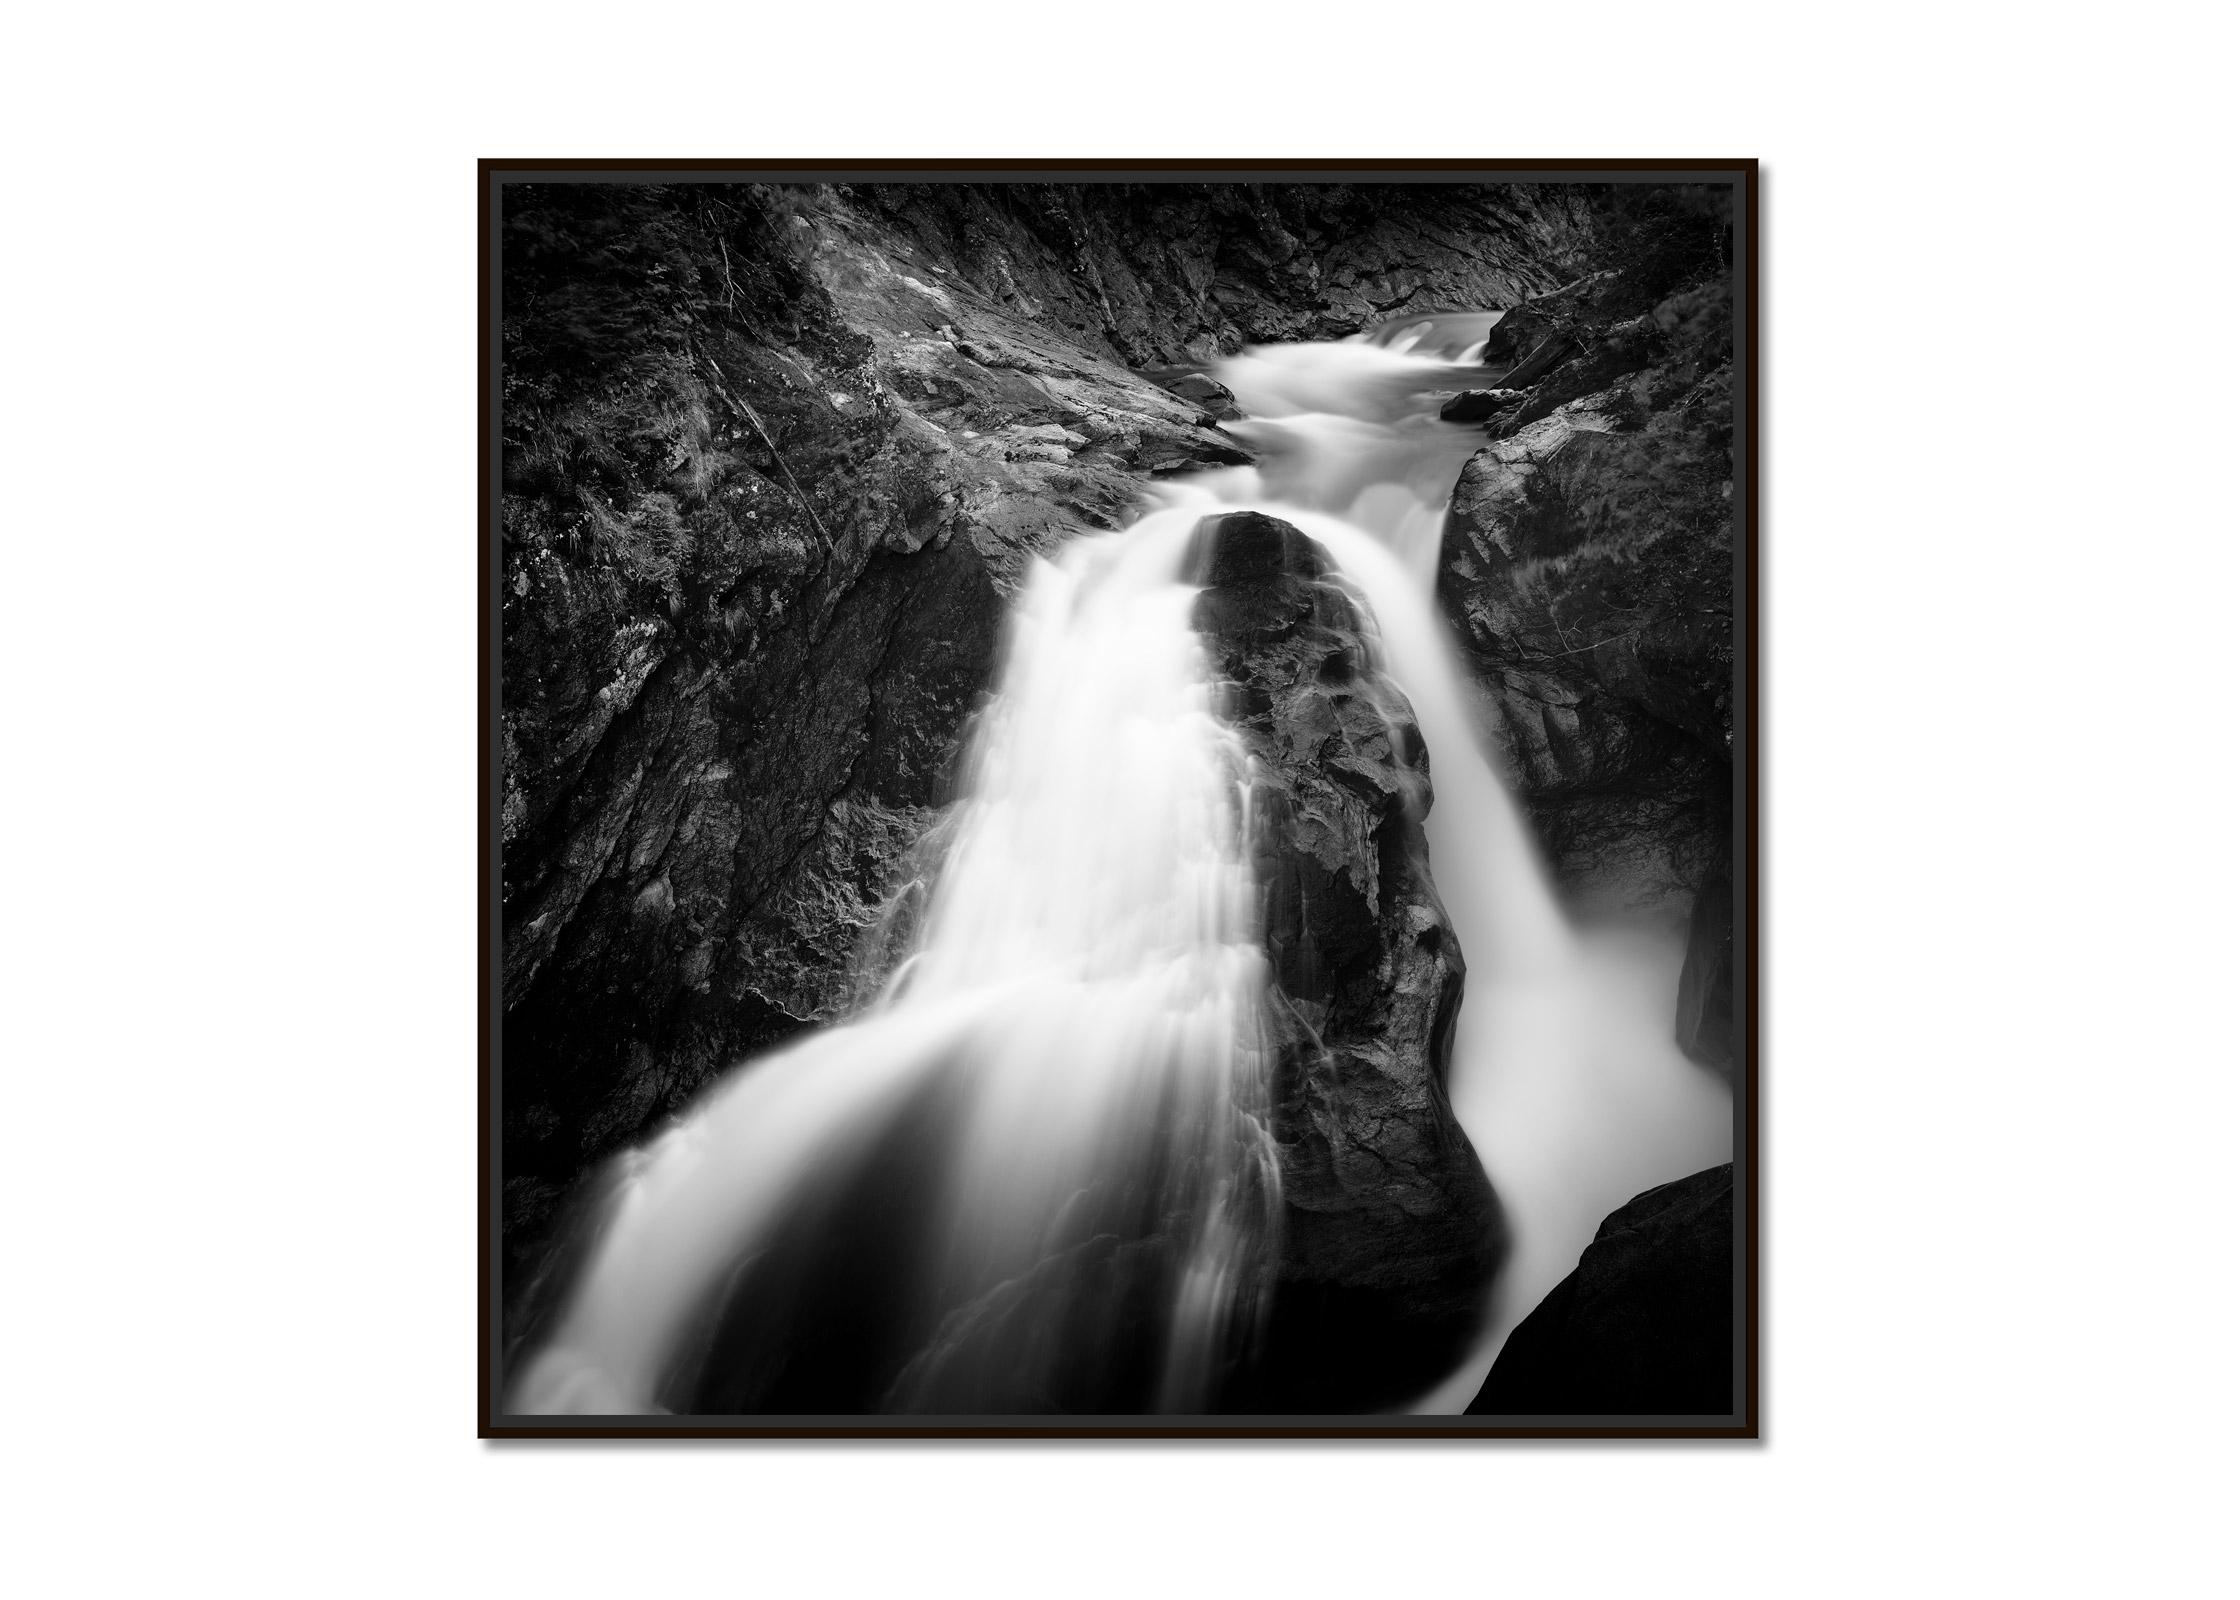 Krimmler Ache, waterfall, mountain river, black and white photography, landscape - Photograph by Gerald Berghammer